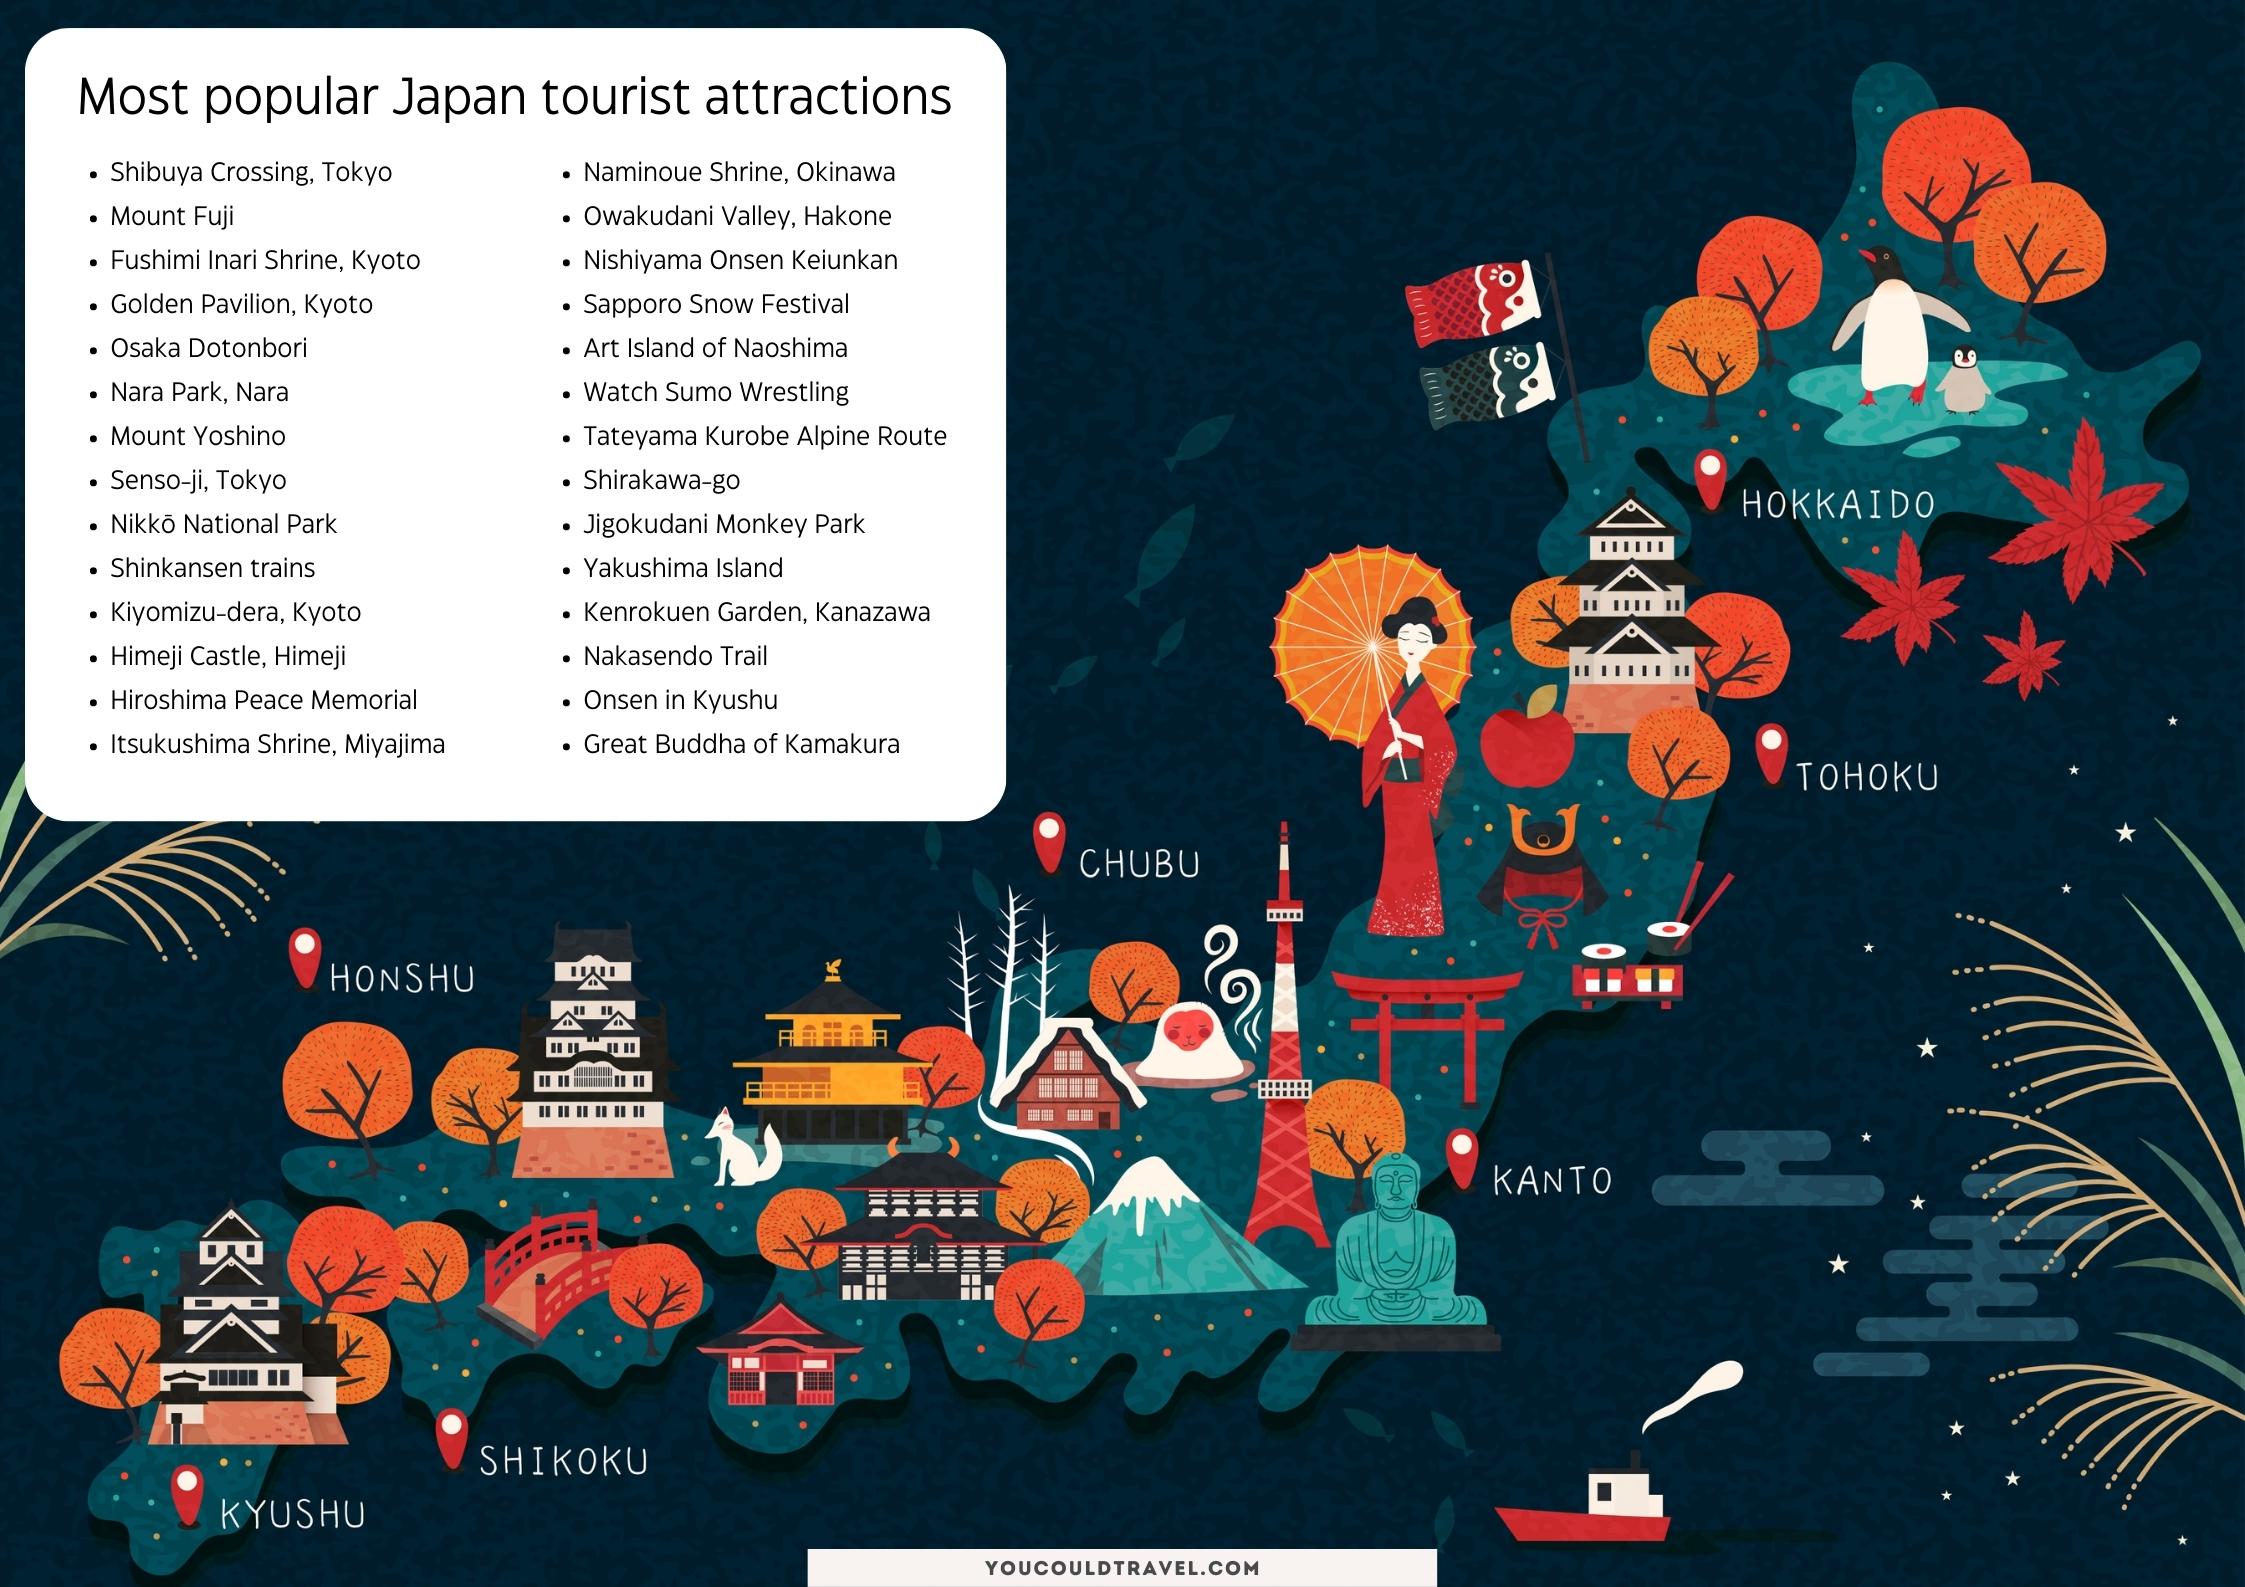 Best Japan tourist attractions with map